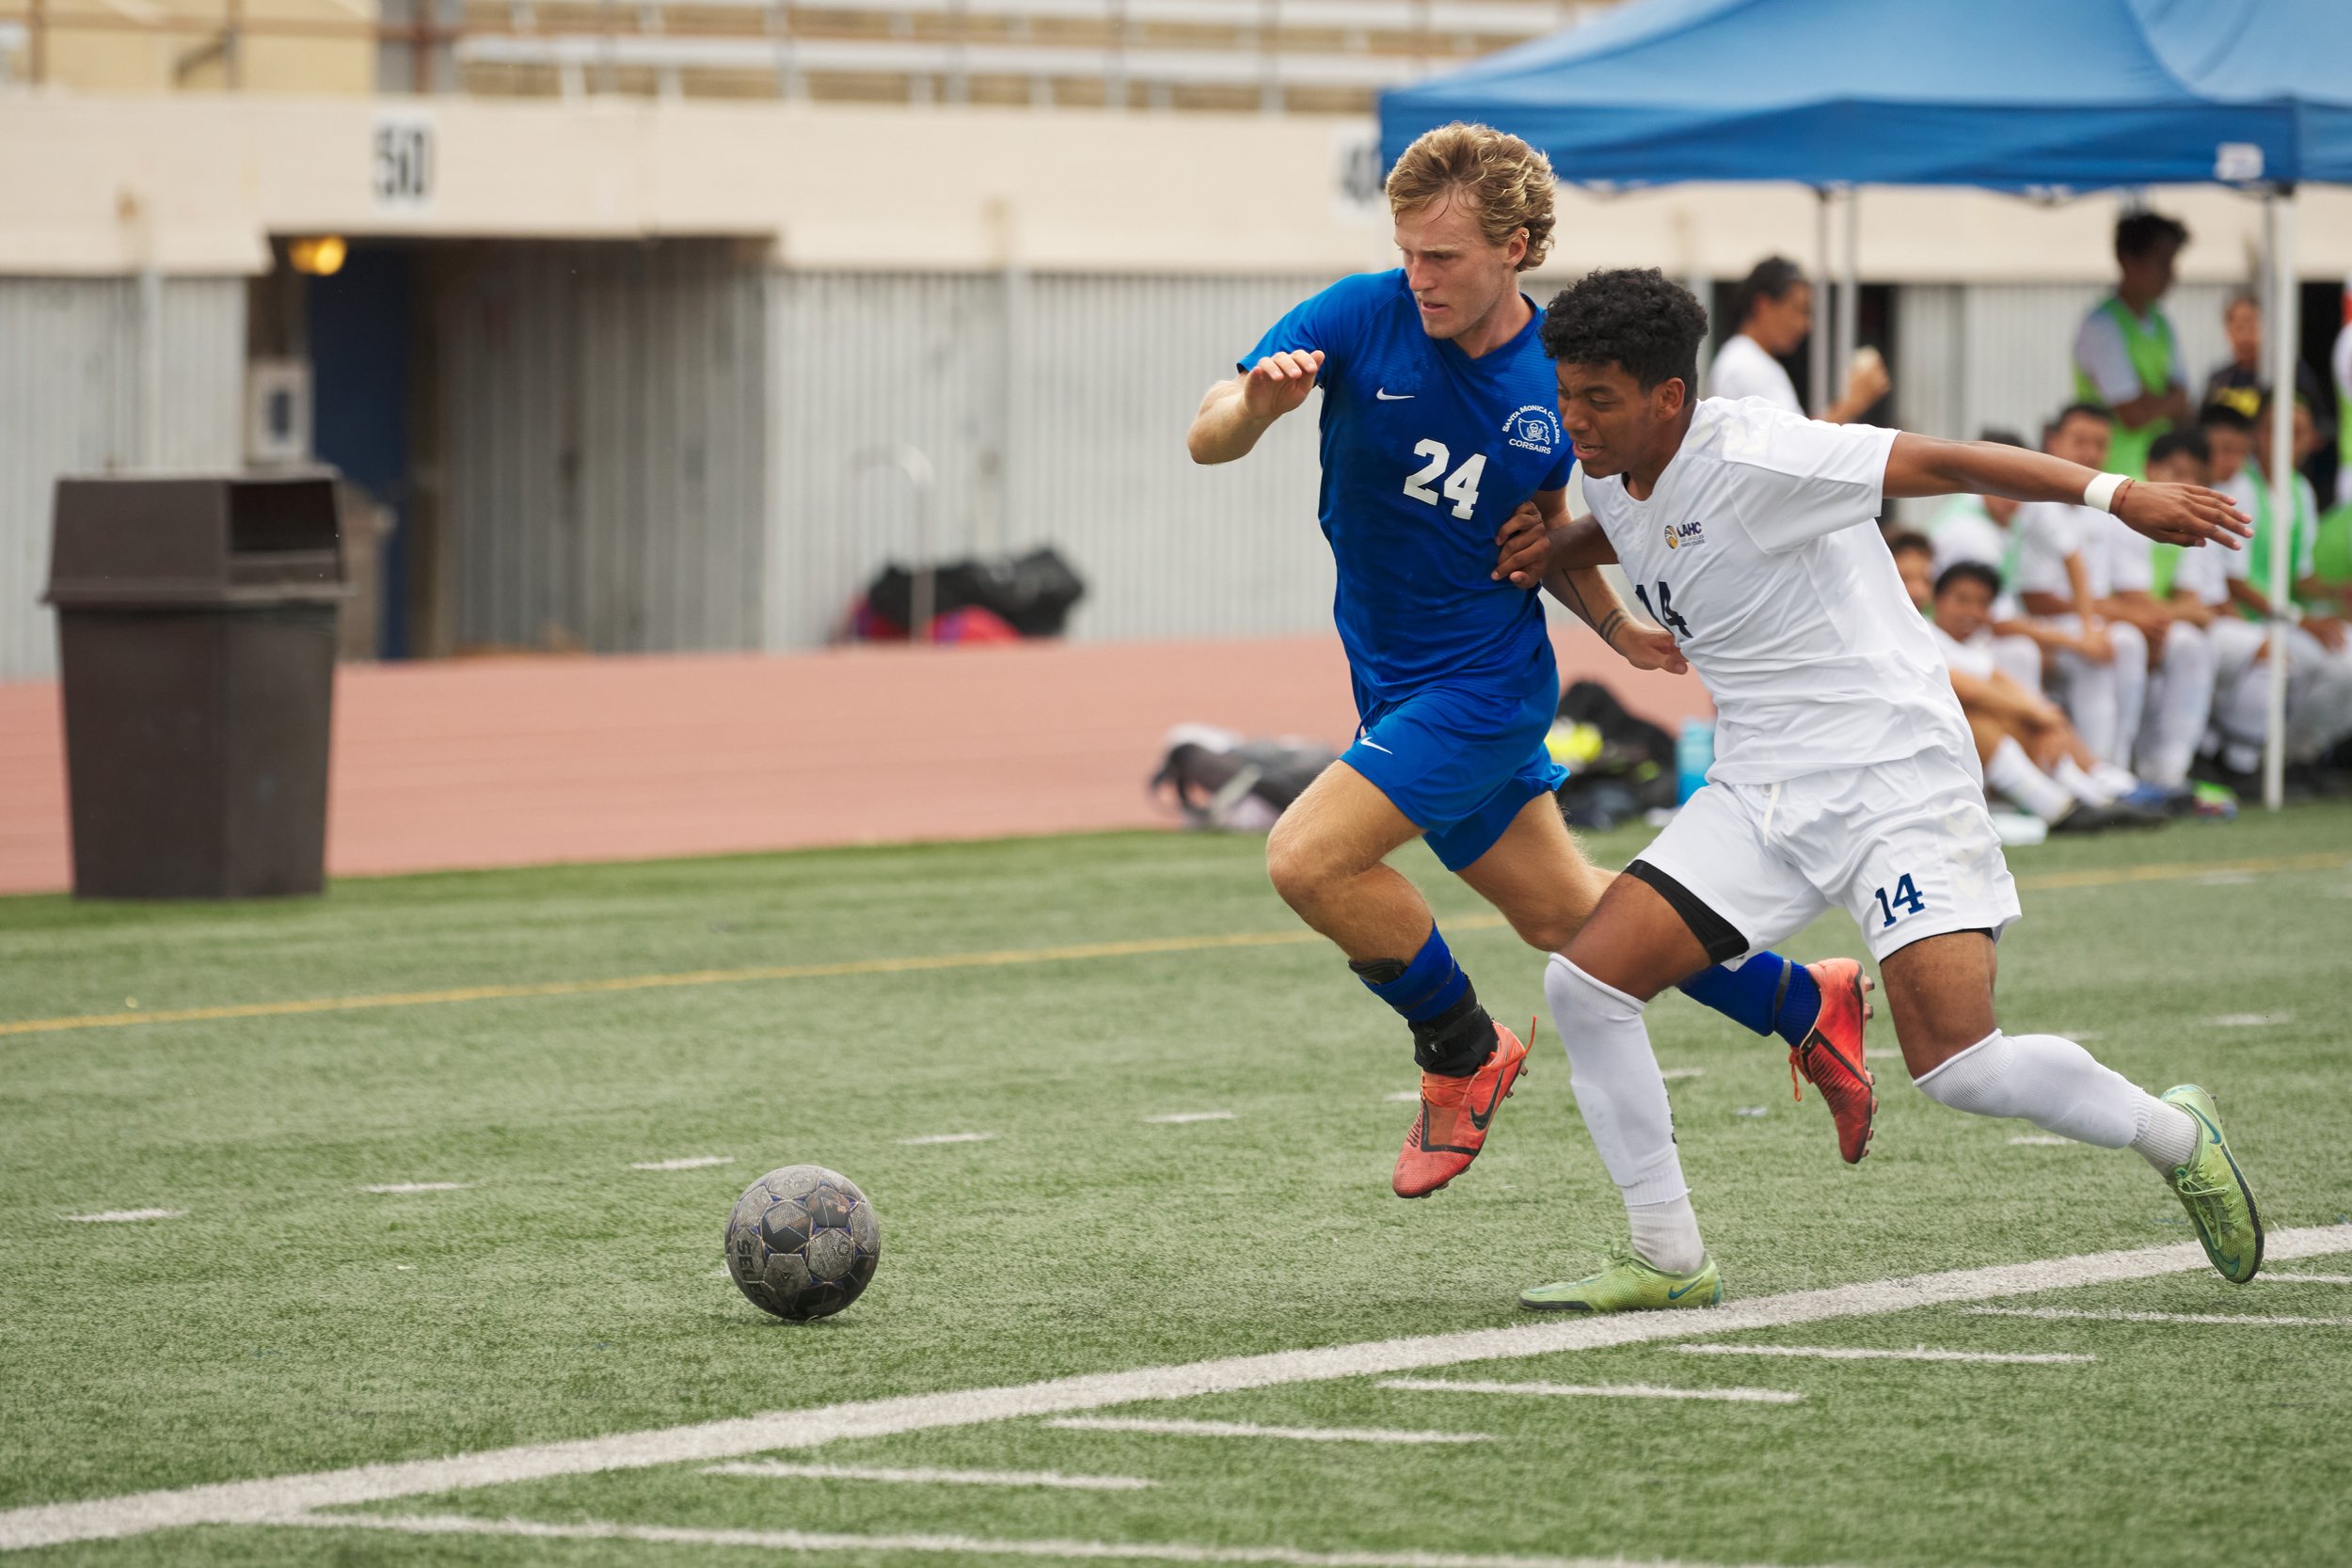  Alexander Lalor, of the Santa Monica College Corsairs, and Edwin Gonzalez, of the Los Angeles Harbor College Seahawks, during the men's soccer match on Friday, September, 9, 2022, at Corsair Field in Santa Monica, Calif . The Corsairs won 4-0. (Nich